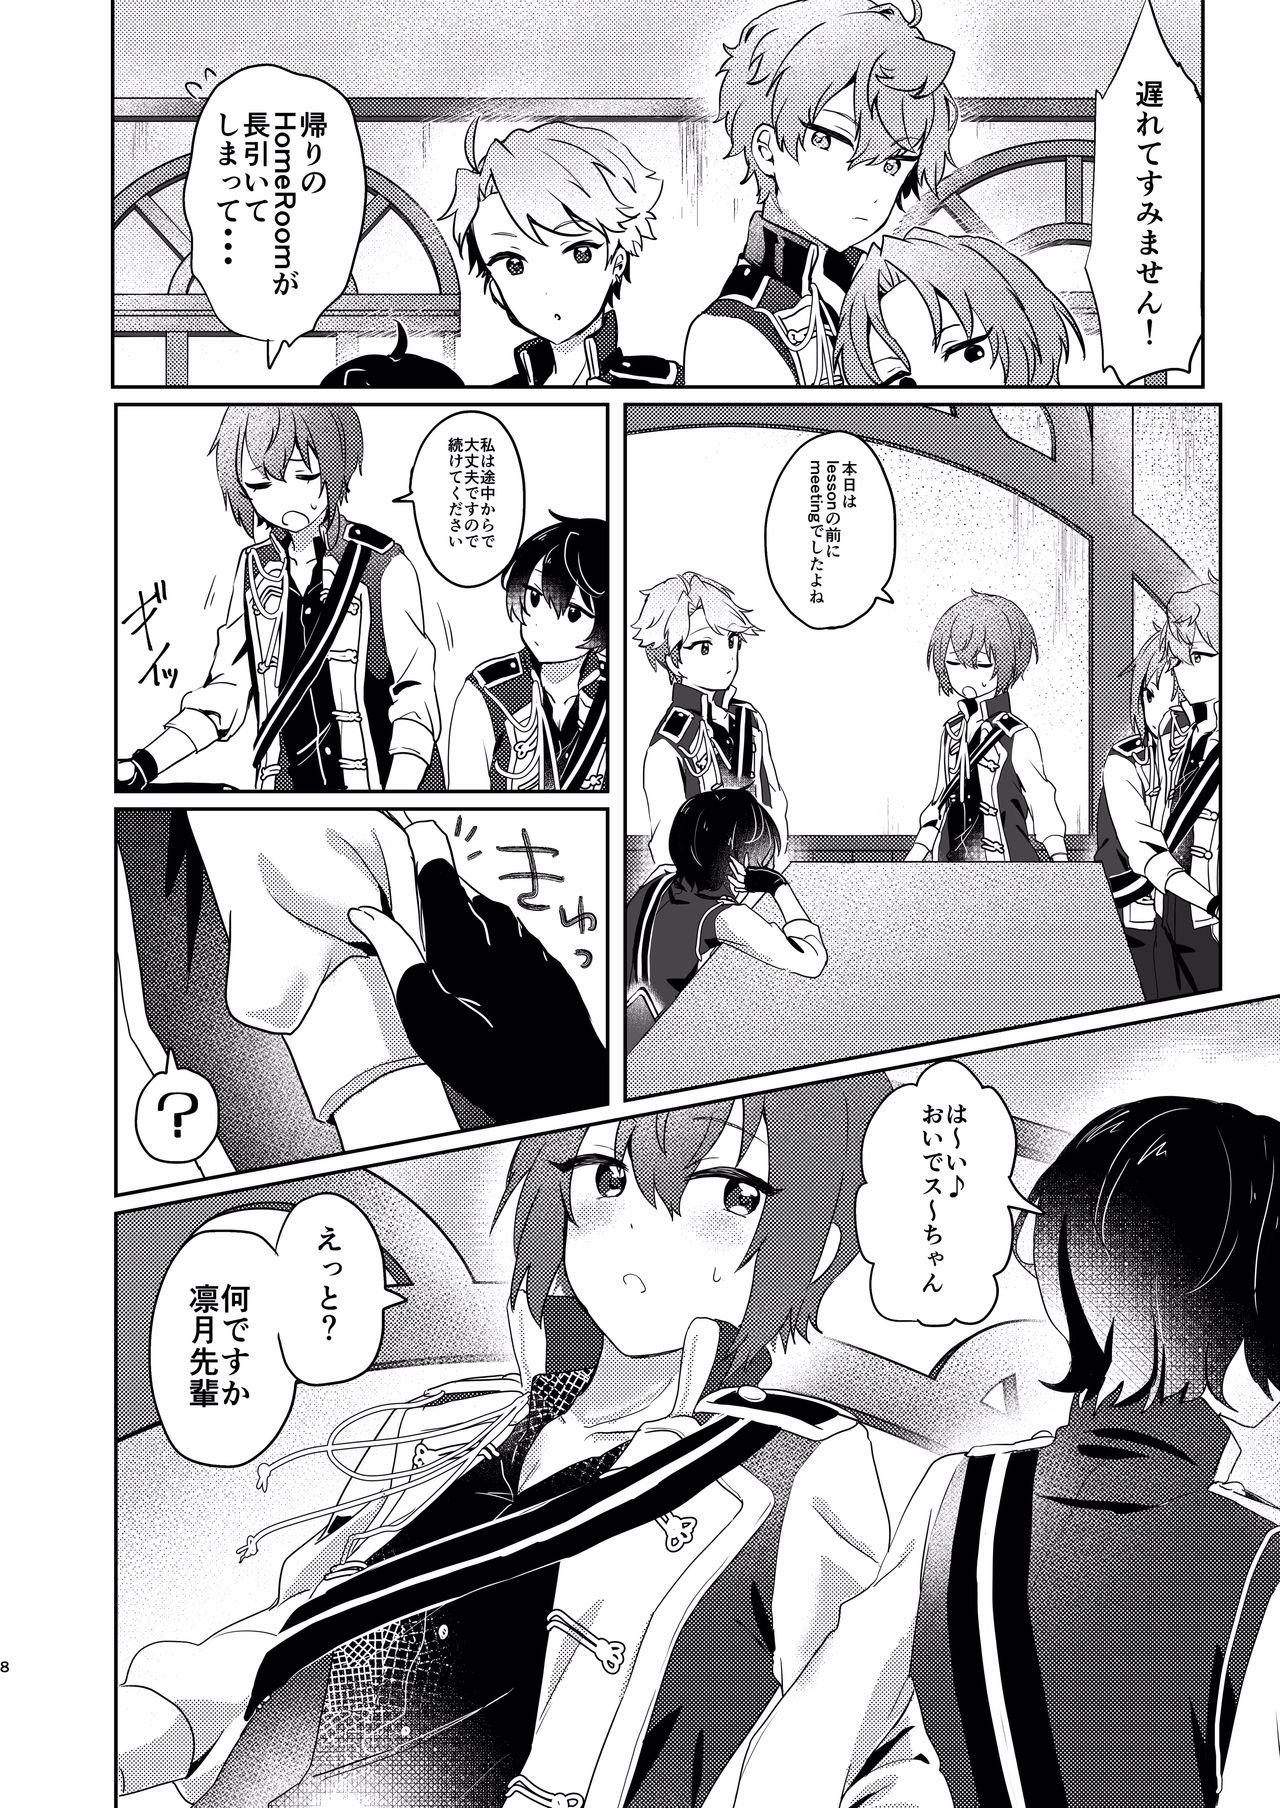 Eat 付きっきりLESSON - Ensemble stars Gay College - Page 6